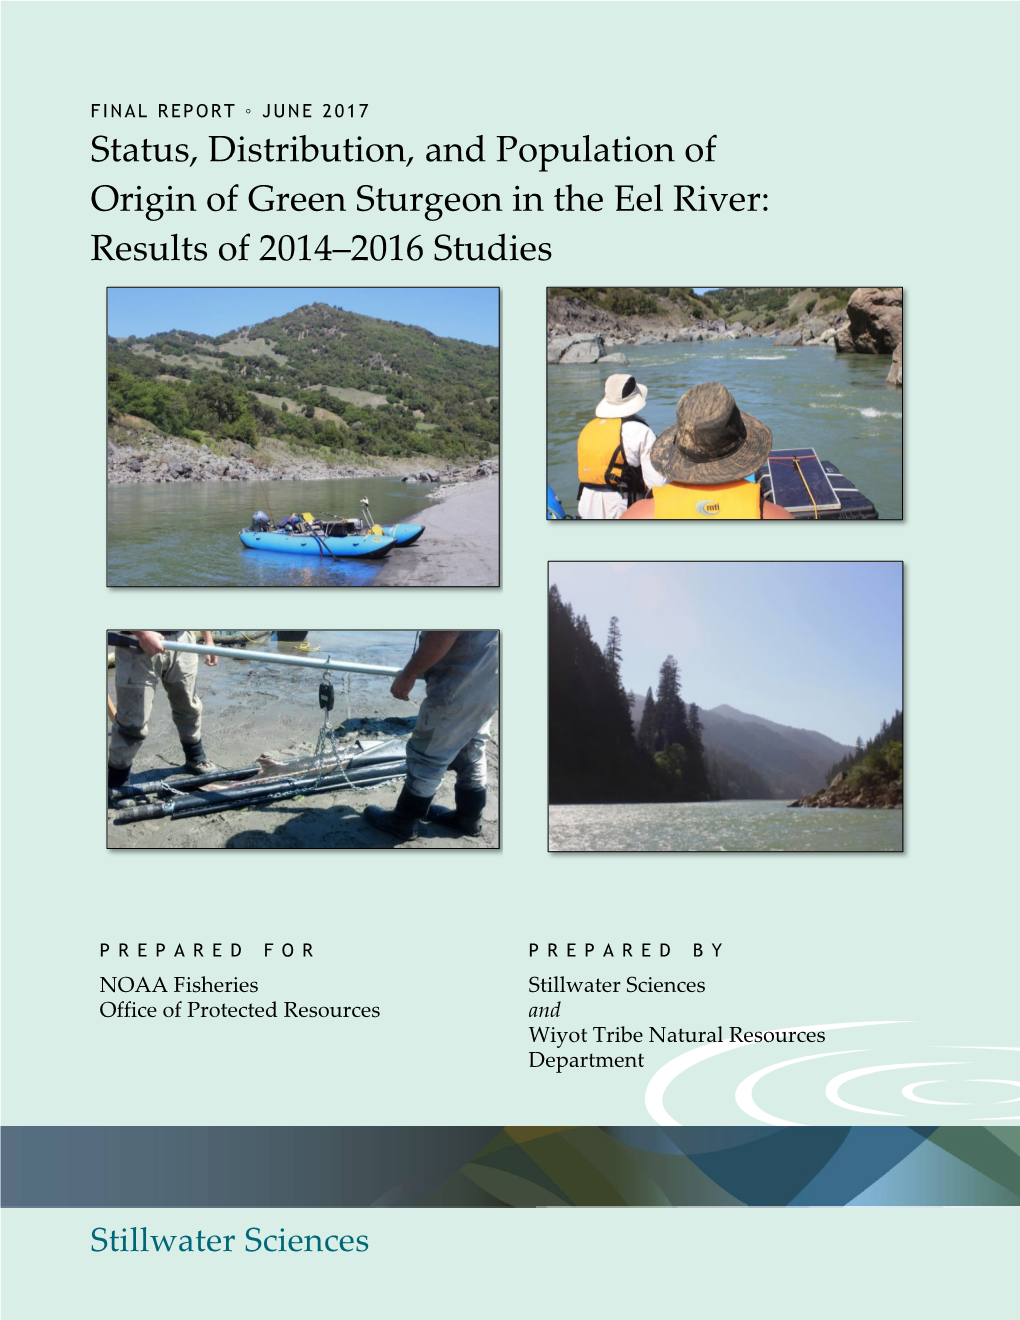 Status, Distribution, and Population of Origin of Green Sturgeon in the Eel River: Results of 2014–2016 Studies